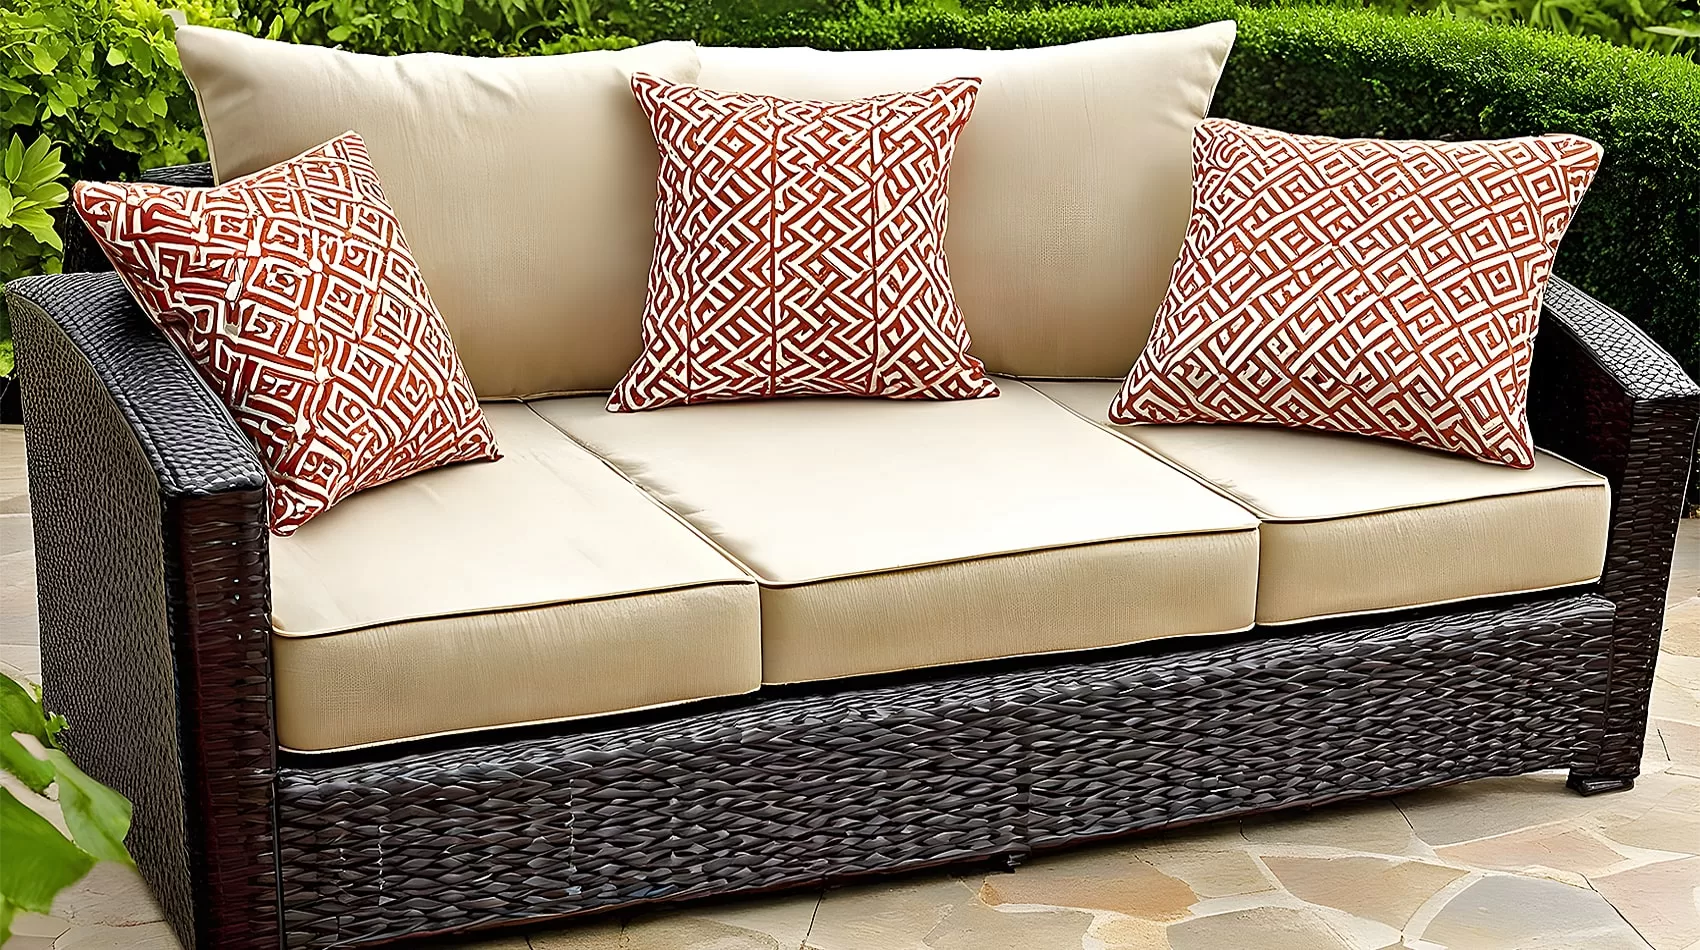 Water-Resistant Covers | Outdoor Couch Cushion Covers | Waterproof Couch Cushion Covers